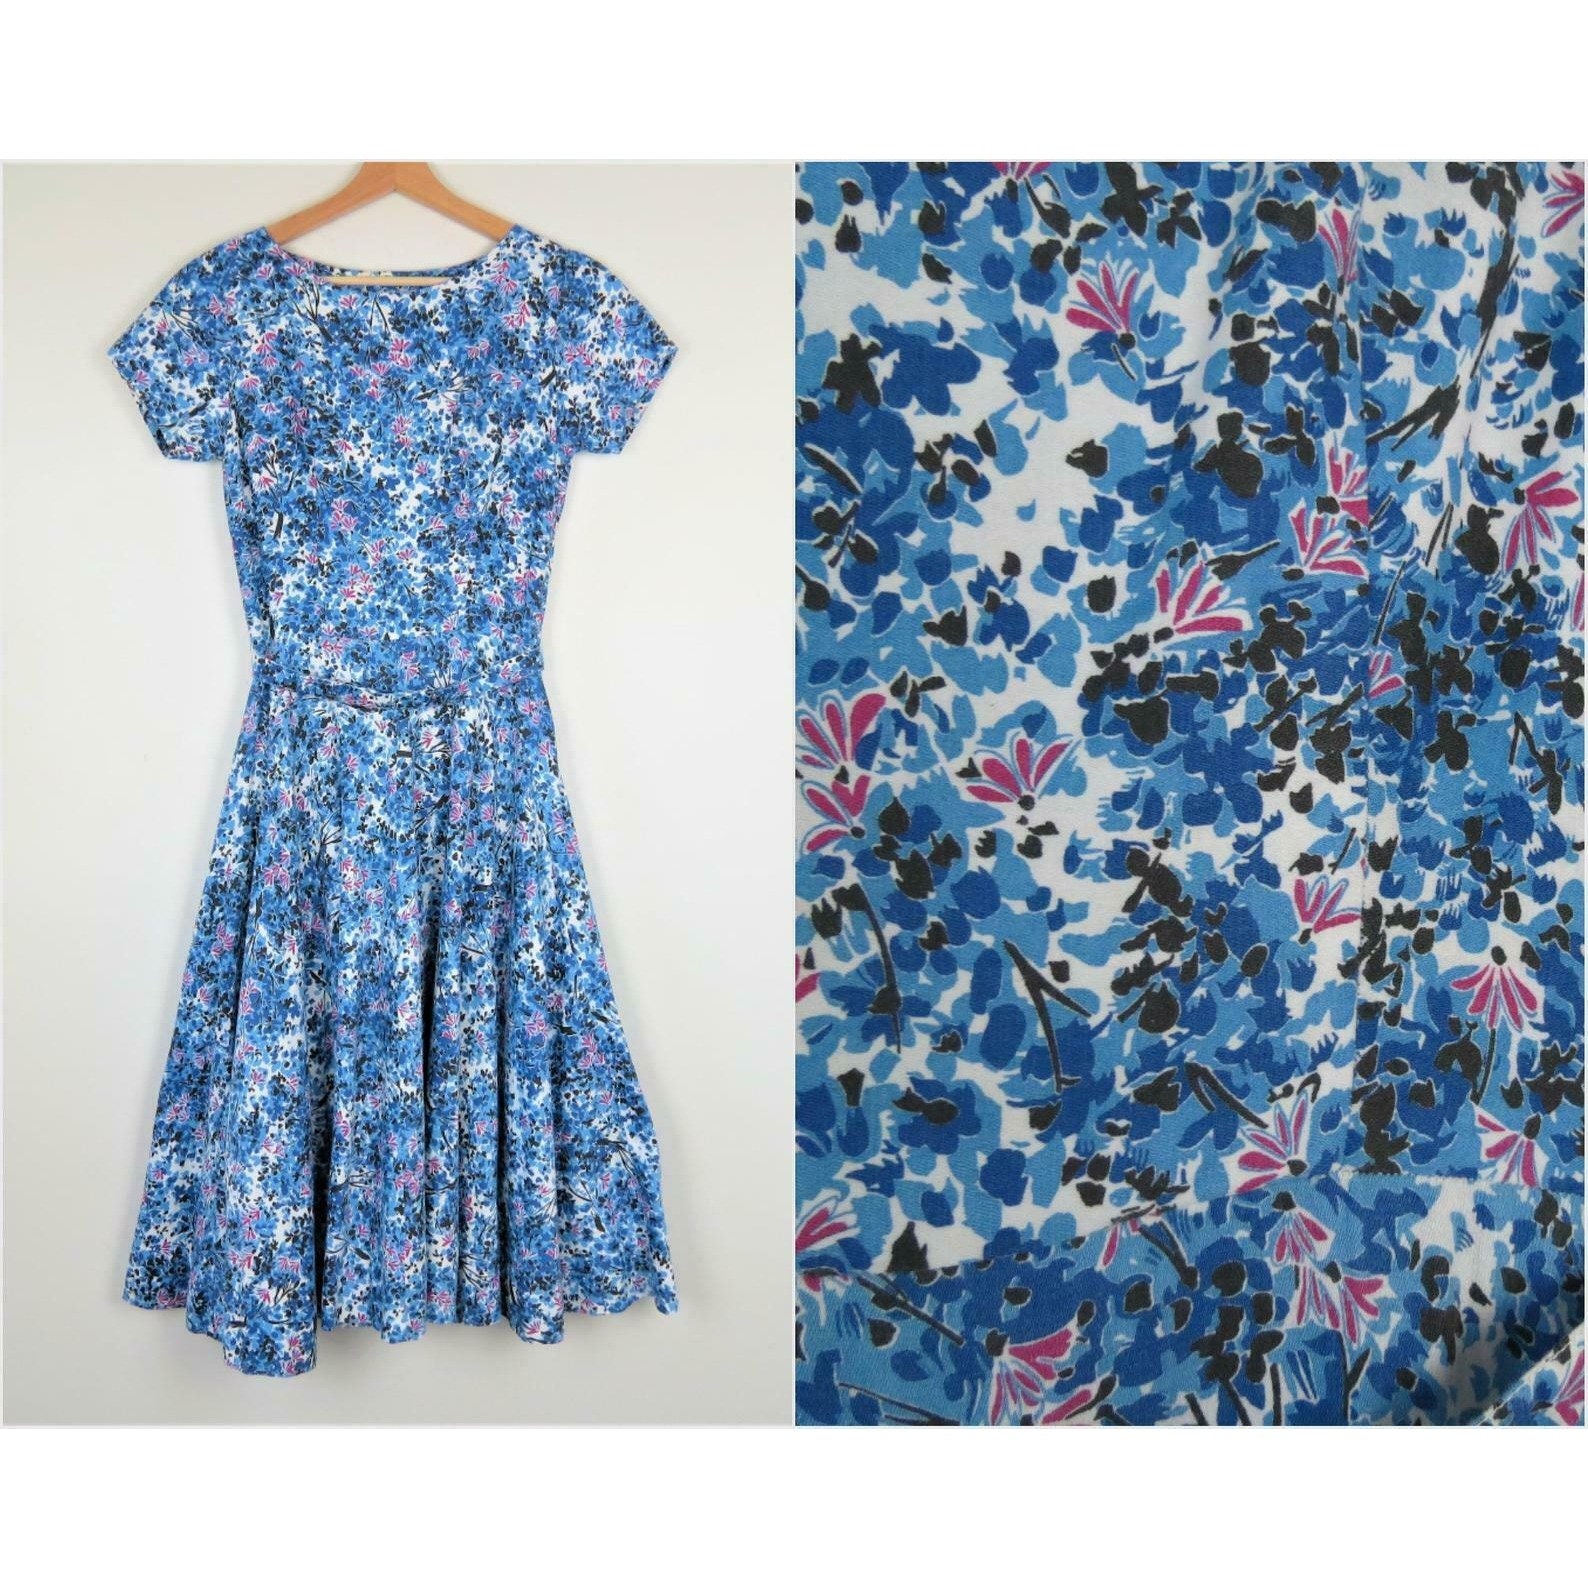 1950s blue flowers floral fit and flare dress medium size